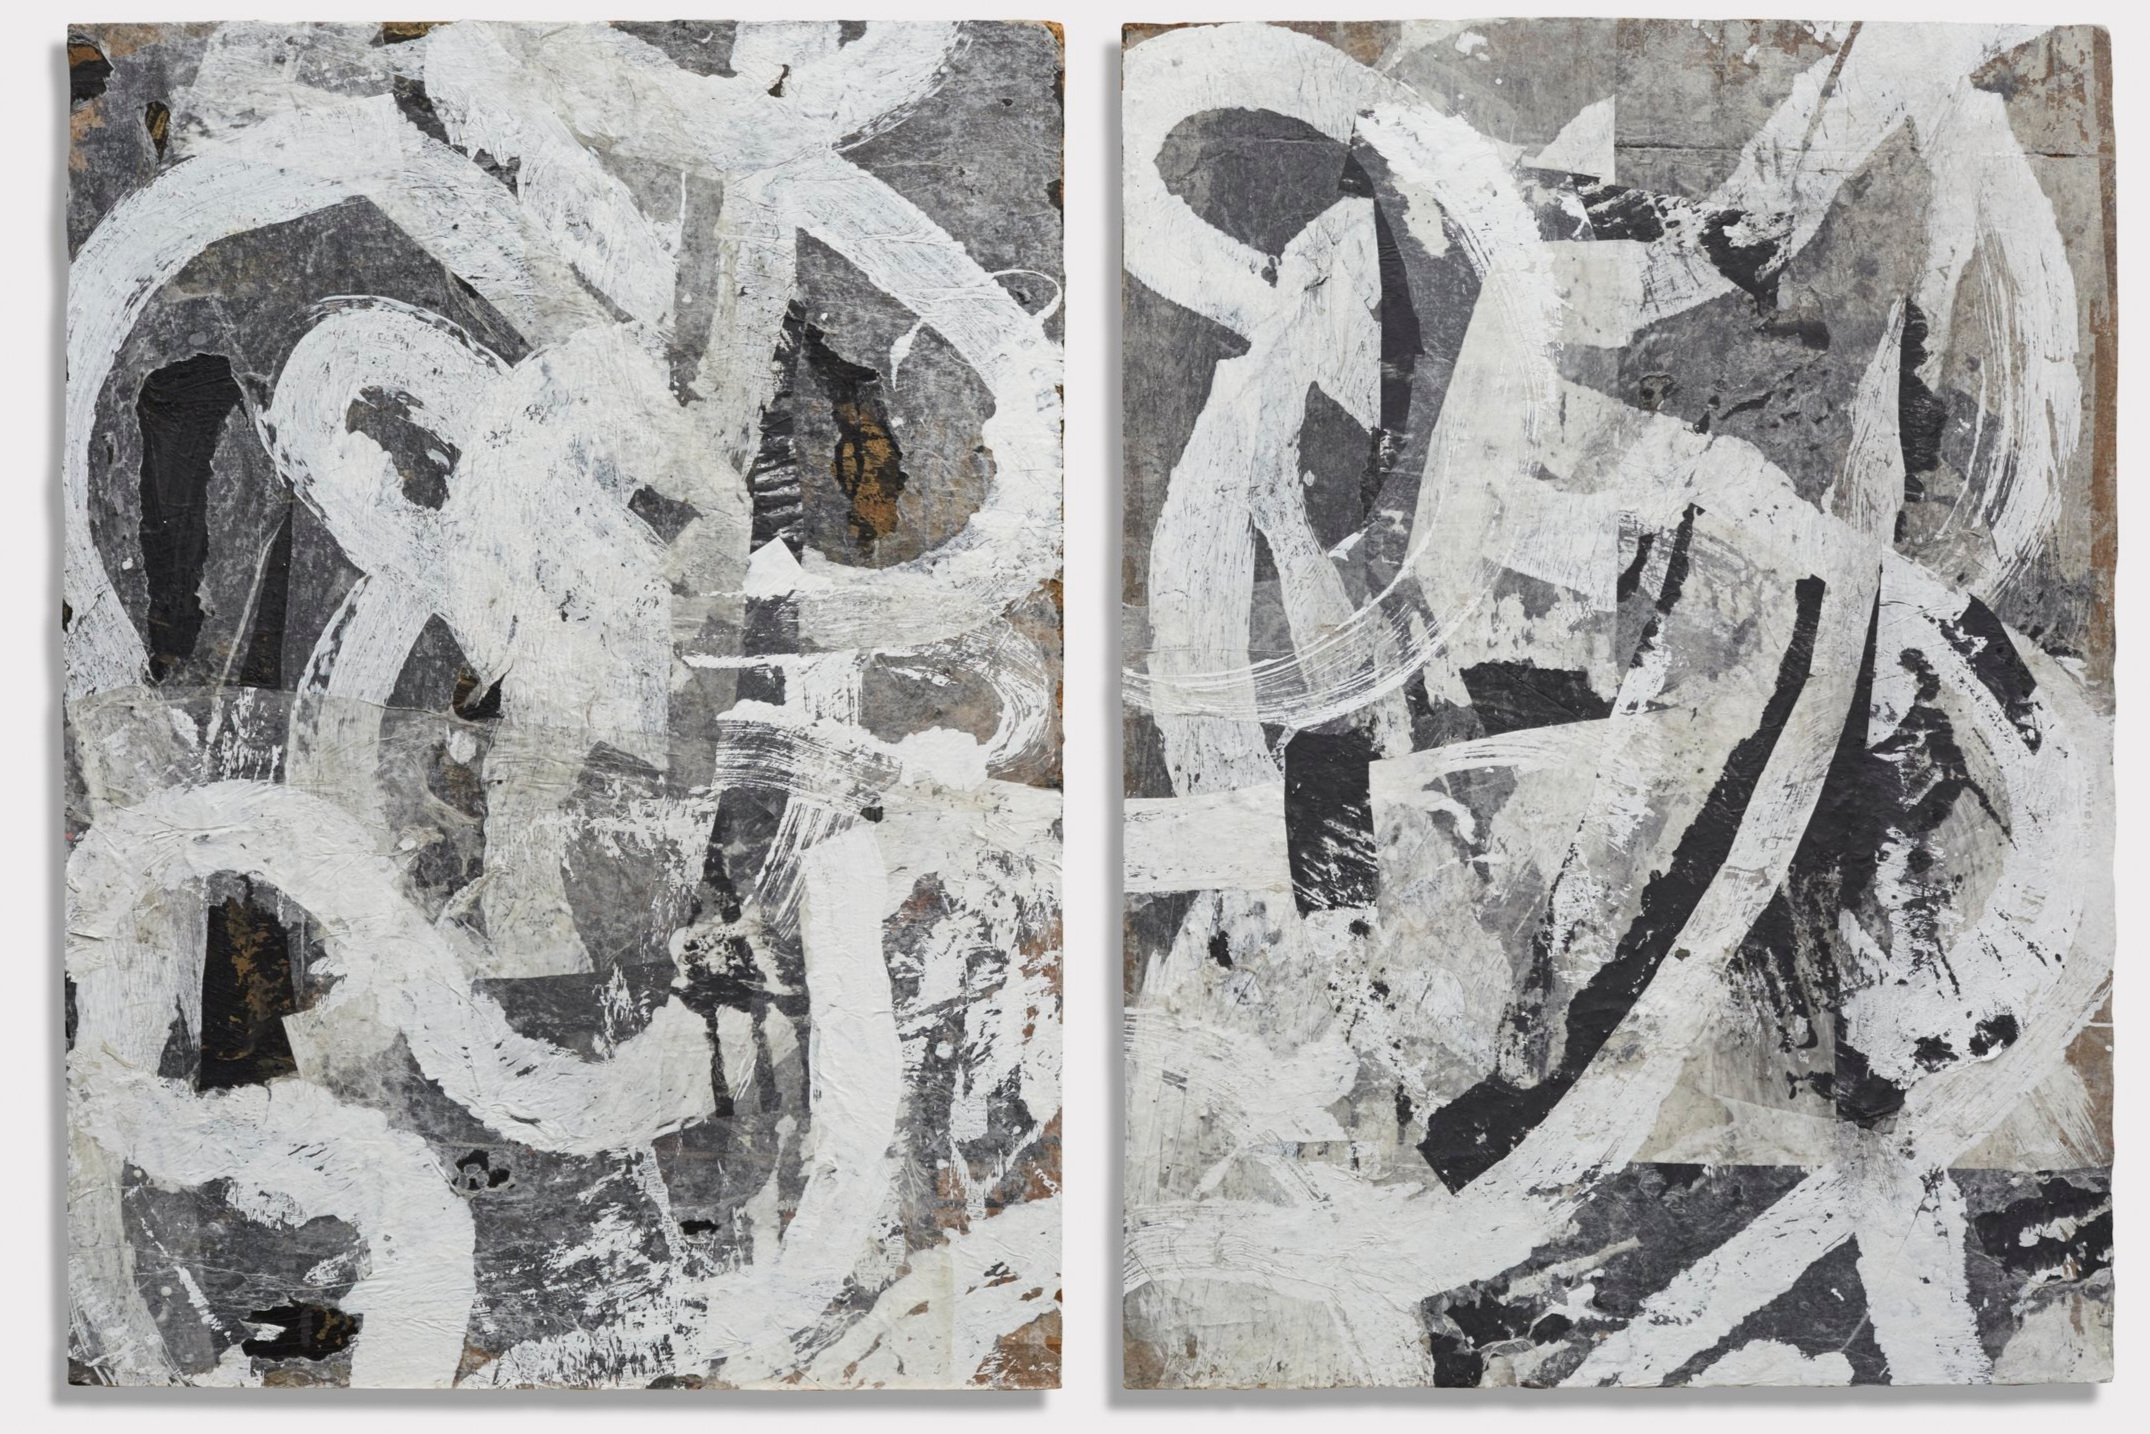    Kissing Cousins     Gesso, Ink, and Collage on found wooden panels.  Diptych, overall dimensions: 32” x 50”. 2017. 